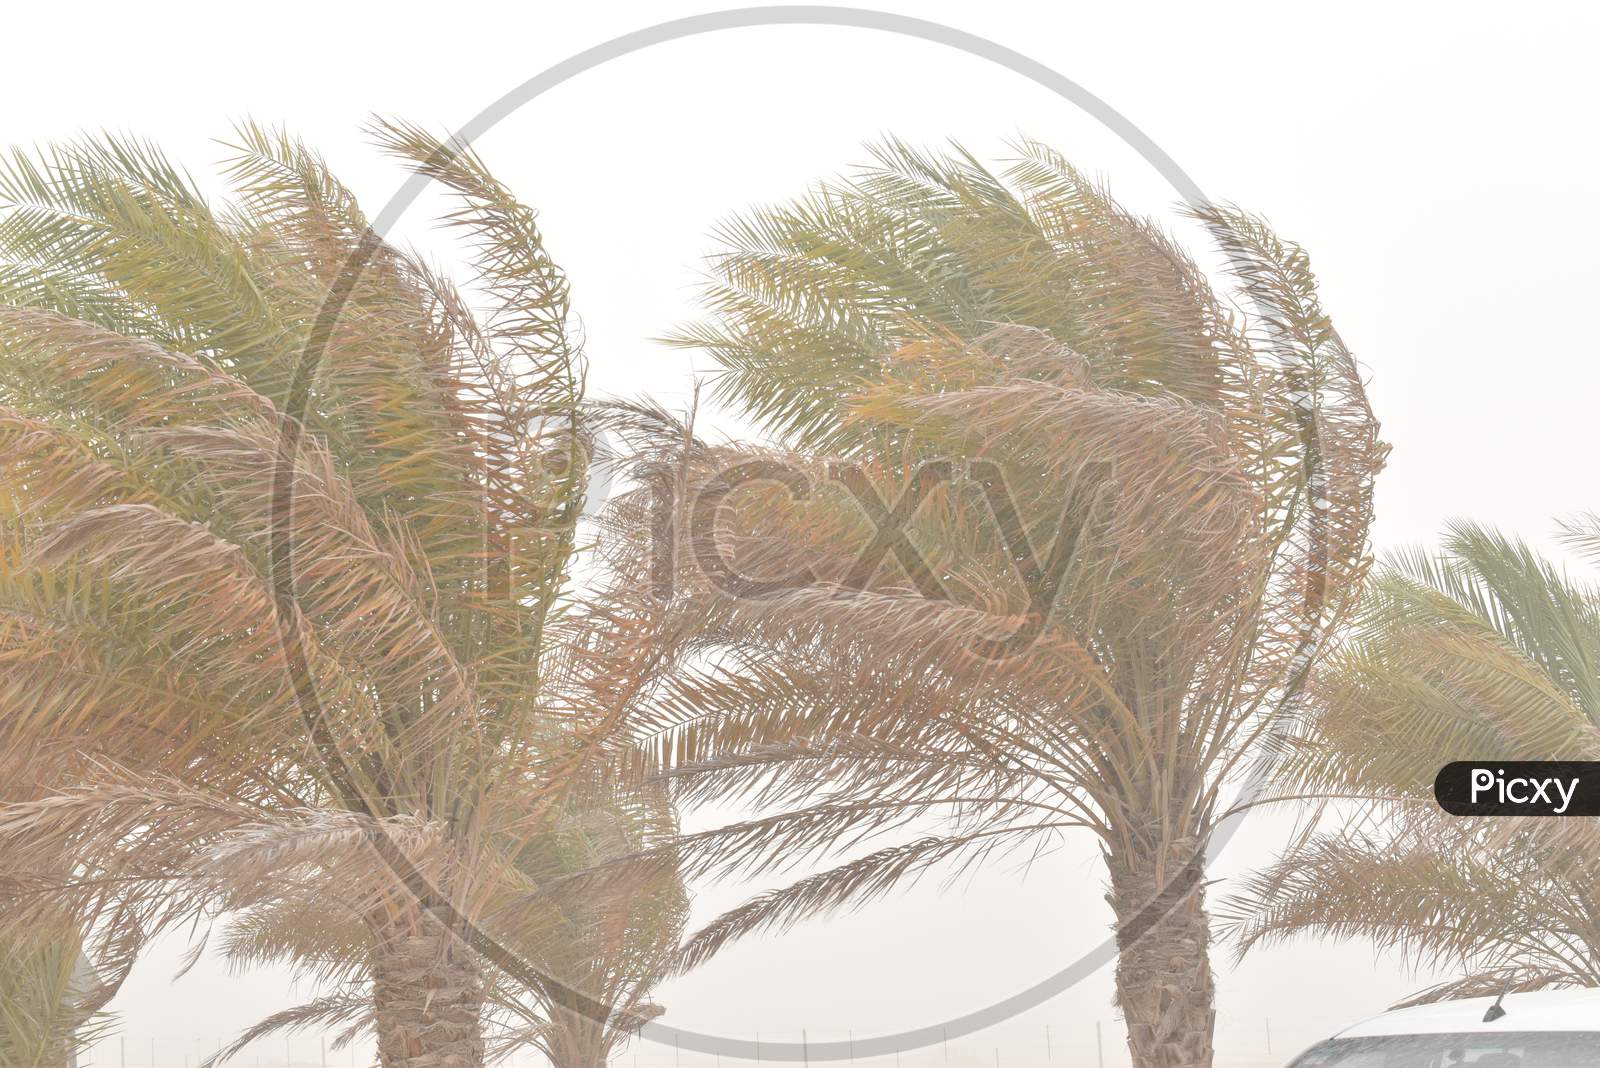 Palm Tree At The Hurricane, Blur Leaf Cause Windy And Heavy Rain